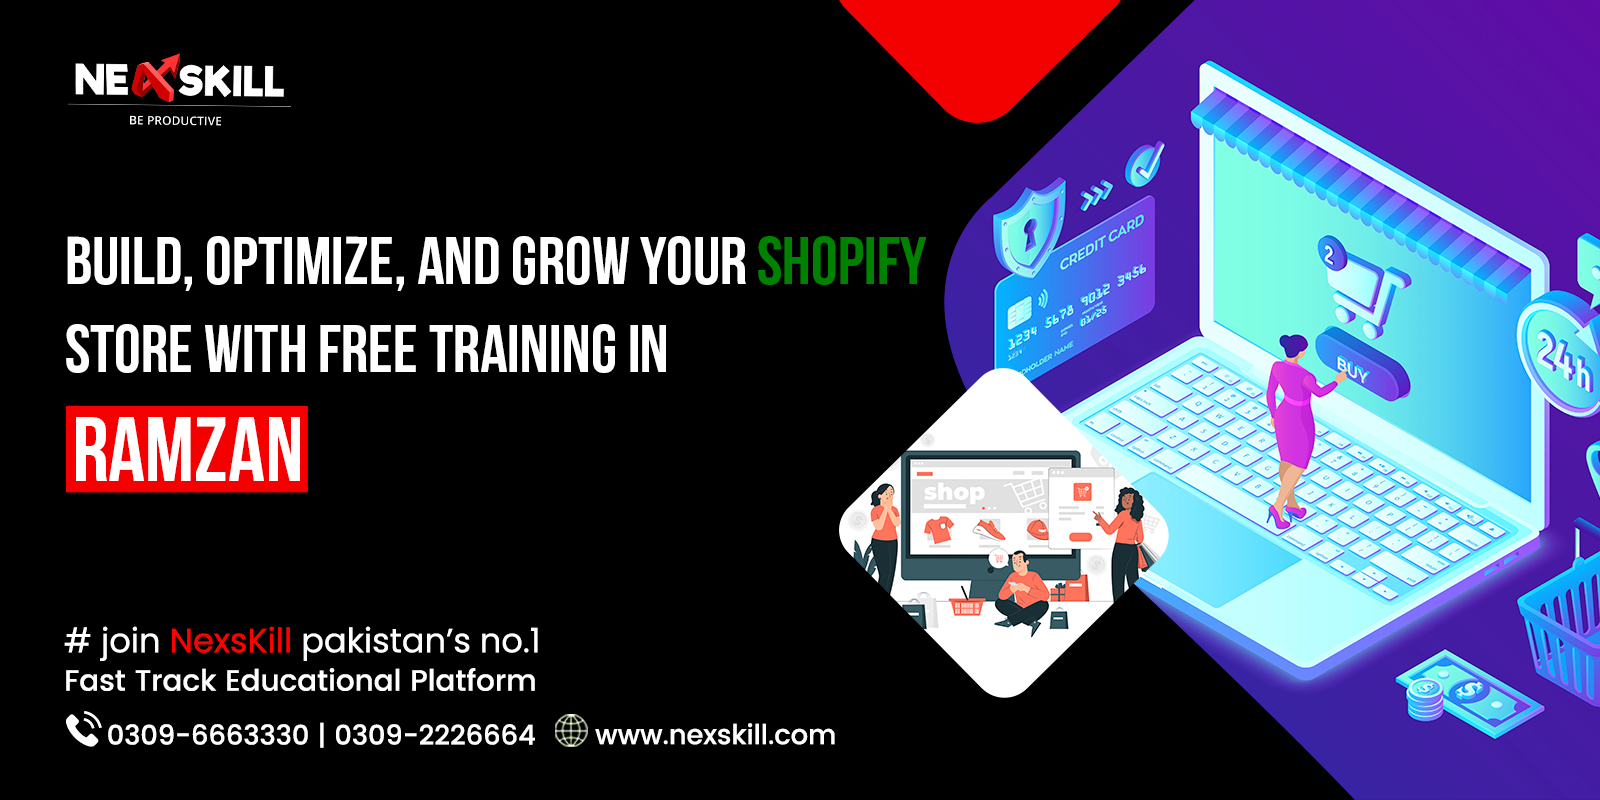 Build, Optimize, and Grow Your Shopify Store with Free Training in Ramzan